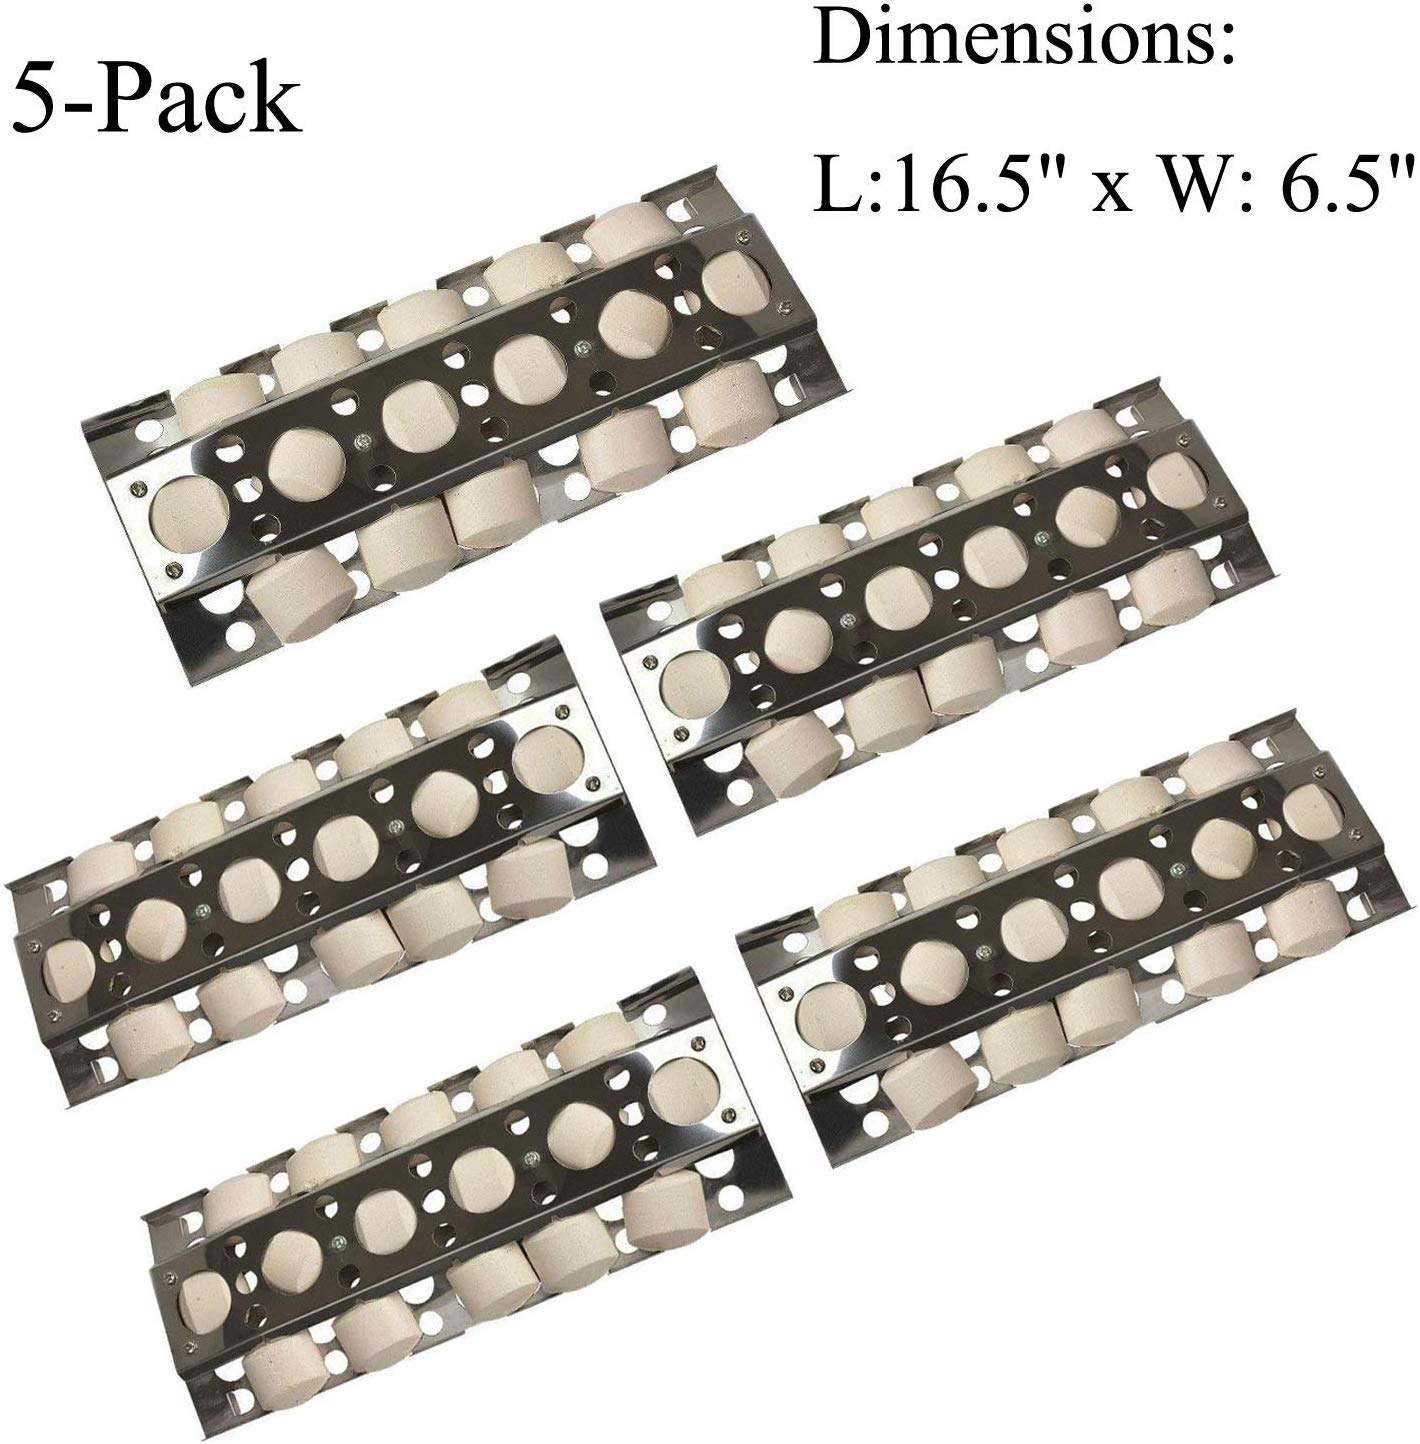 GasSaf Porcelain Steel Heat Plate Replacement for Select Ducane Gas Grill Mod... 